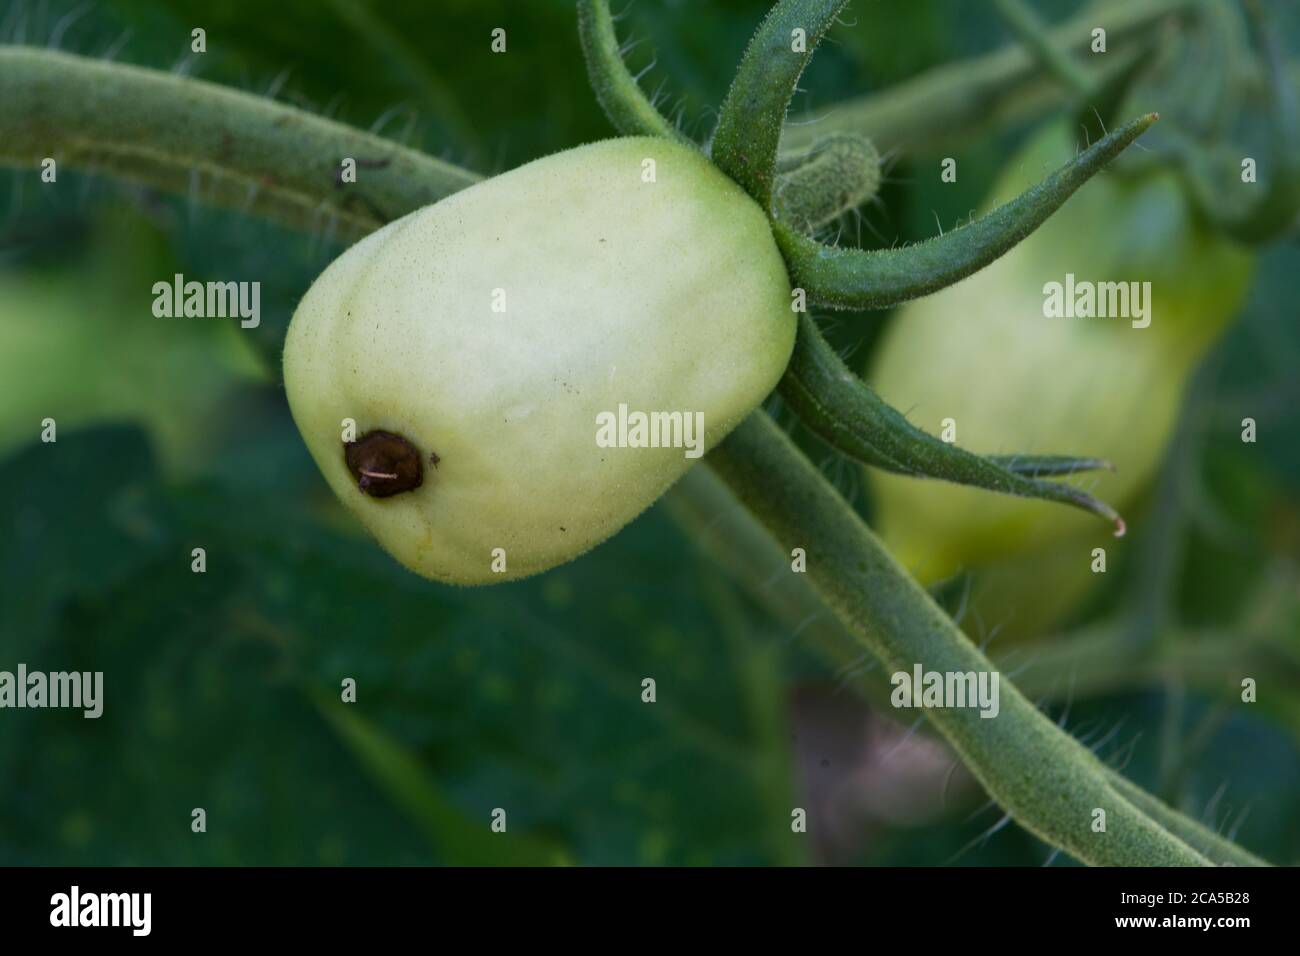 Blossom end rot on a green plum tomato Stock Photo